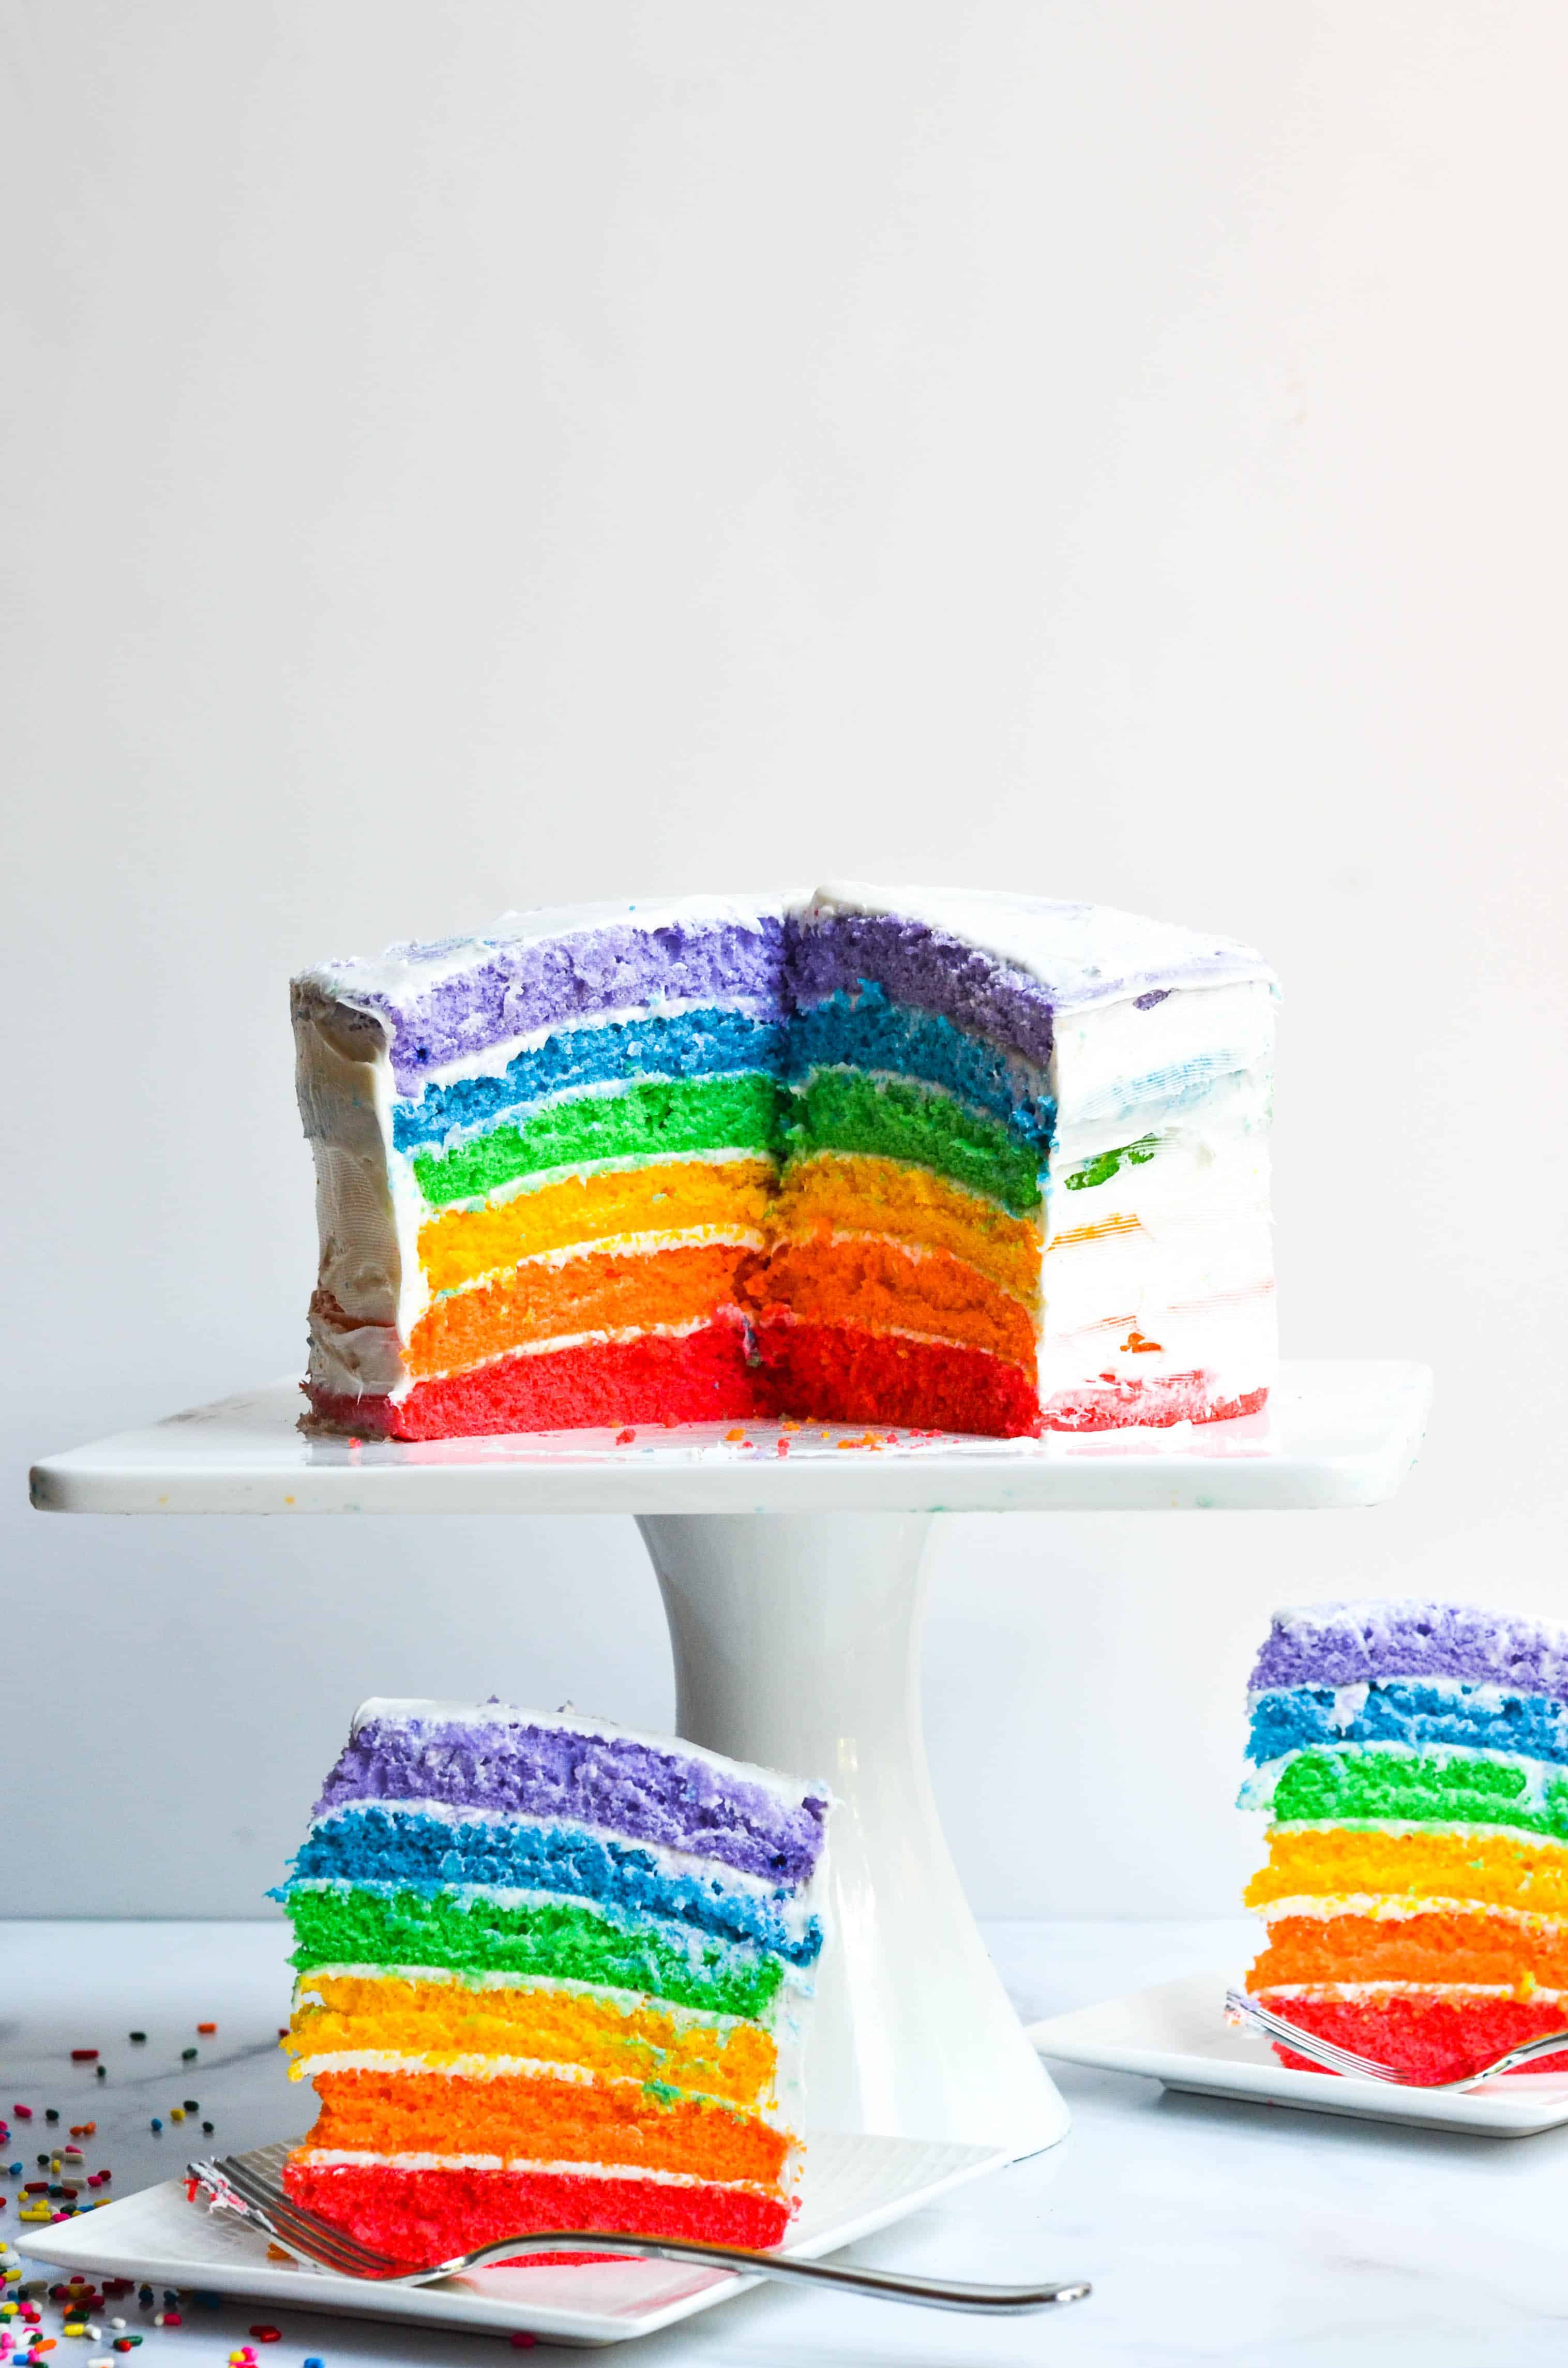 You Can Make Any Cake a Rainbow Cake - The Unlikely Baker®